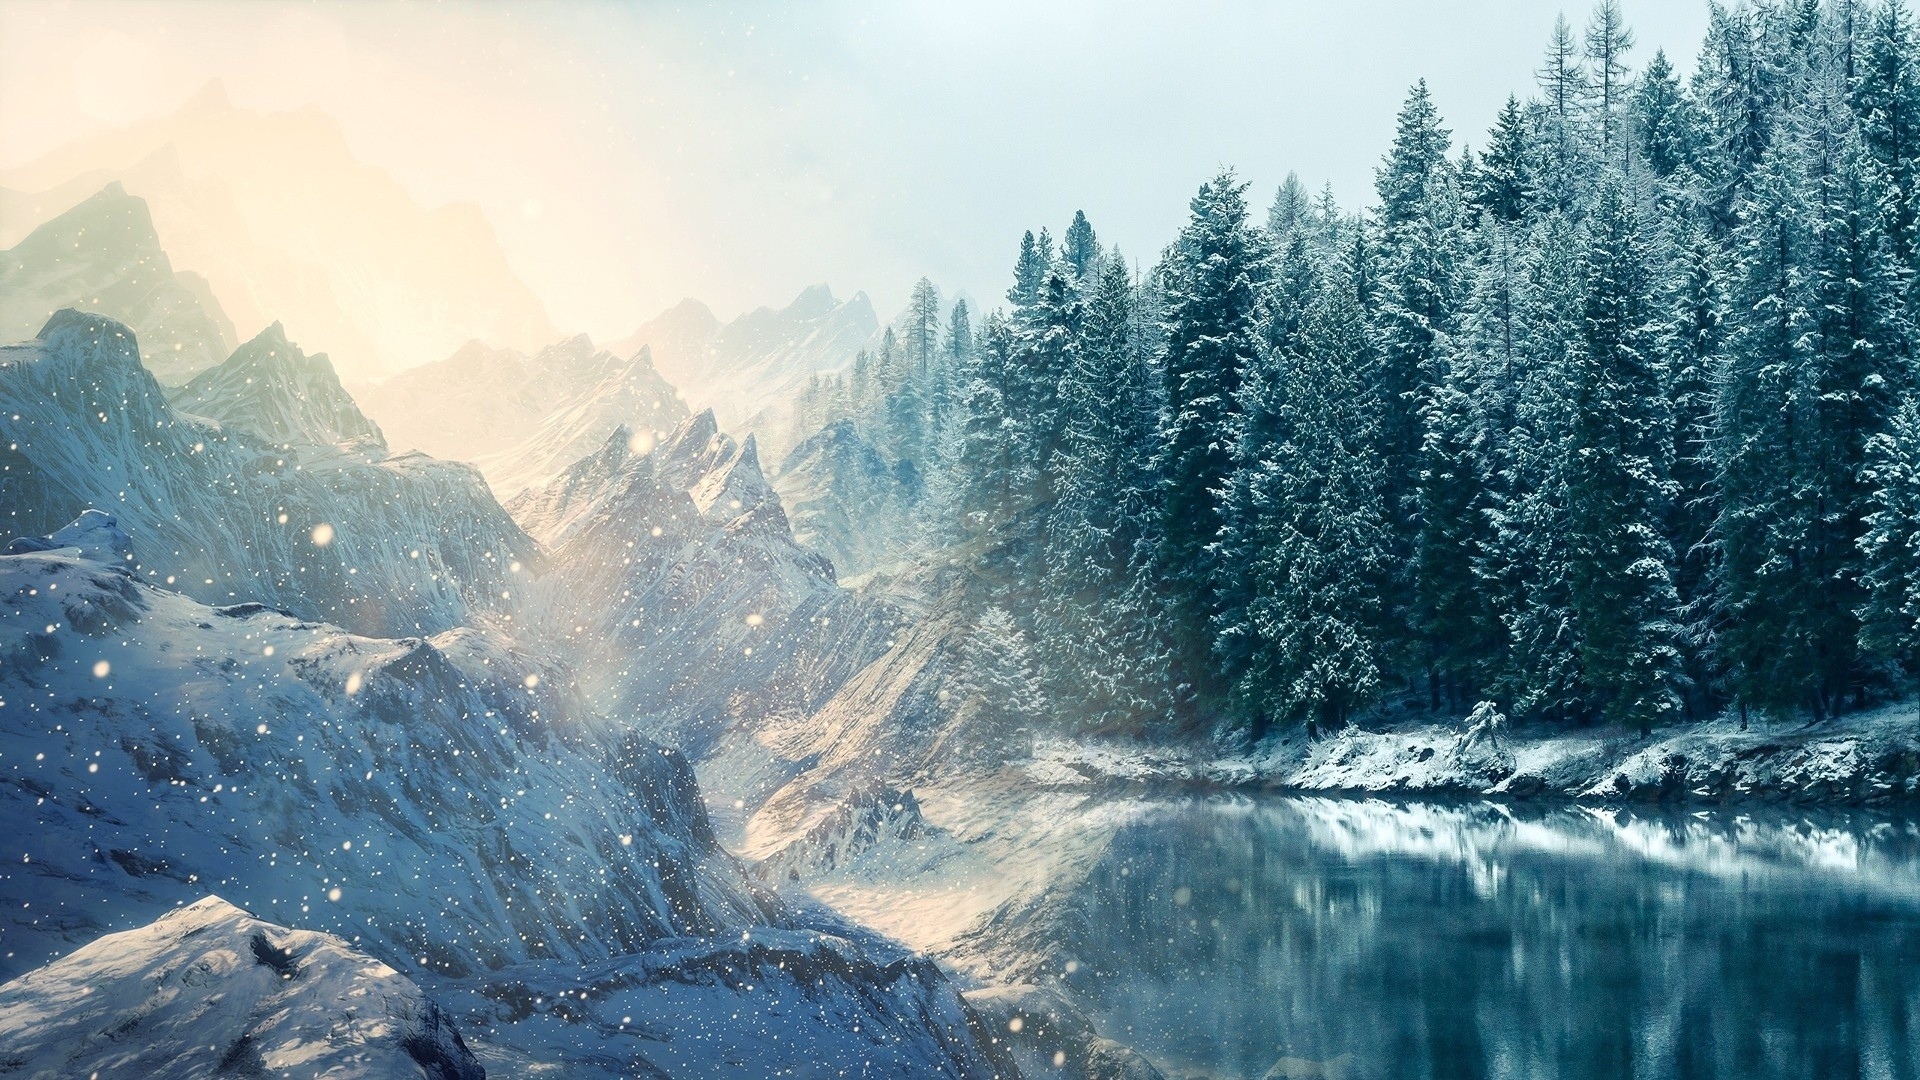 manipulation, Cg, Digital, Art, Artistic, Rivers, Lakes, Water, Reflection, Cold, Shore, Trees, Forest, Winter, Snow, Seasons, Snowing, Wind, Flakes, Drops, Sparkle Wallpaper